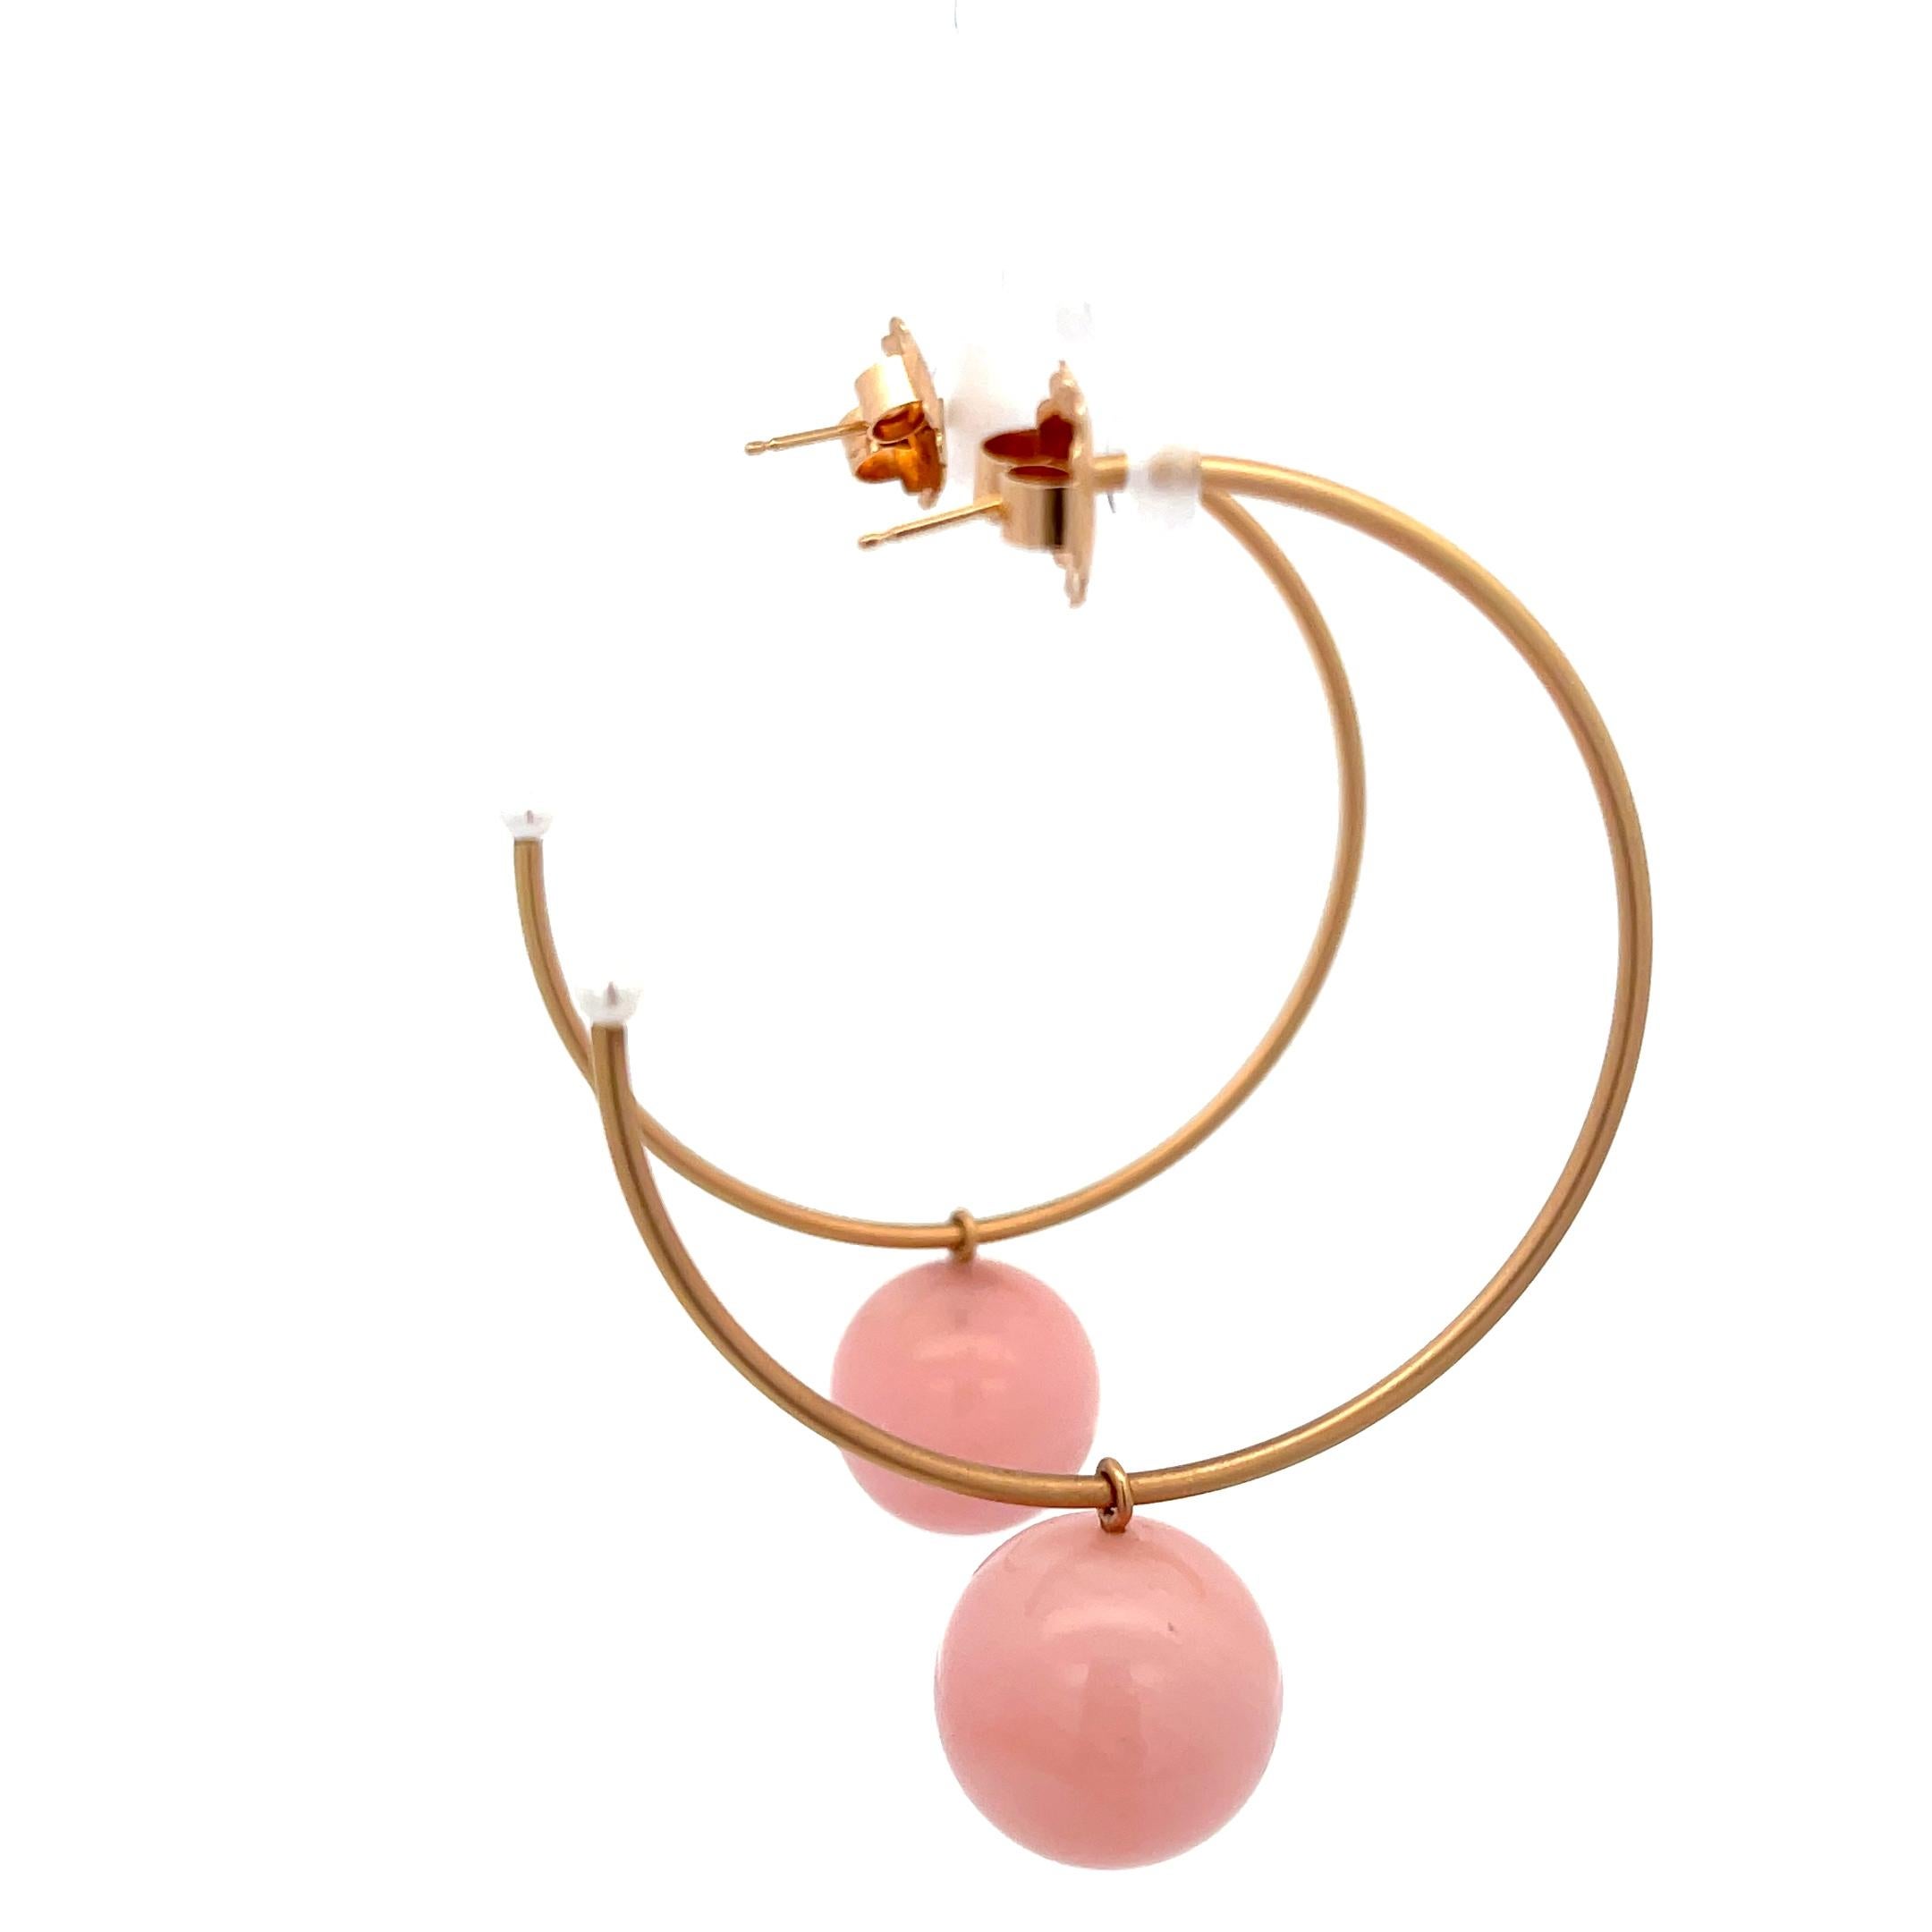 Round Cut Irene Neuwirth Pink Opal Pearl Hoops Earrings 18K Rose Gold For Sale